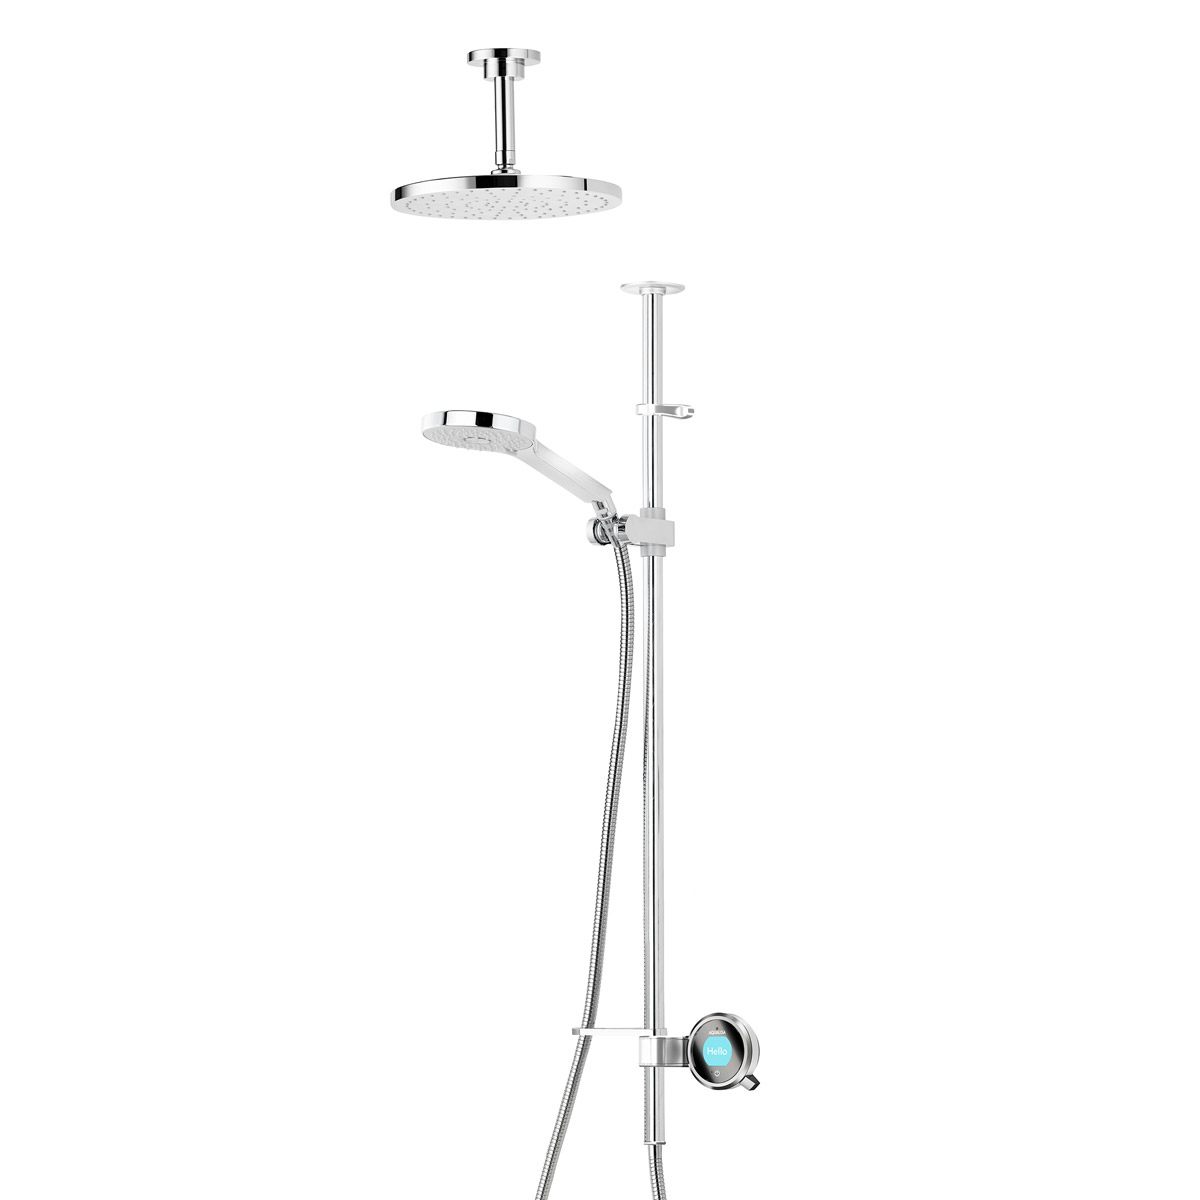 Aqualisa Q exposed digital shower standard with slider rail and ceiling arm